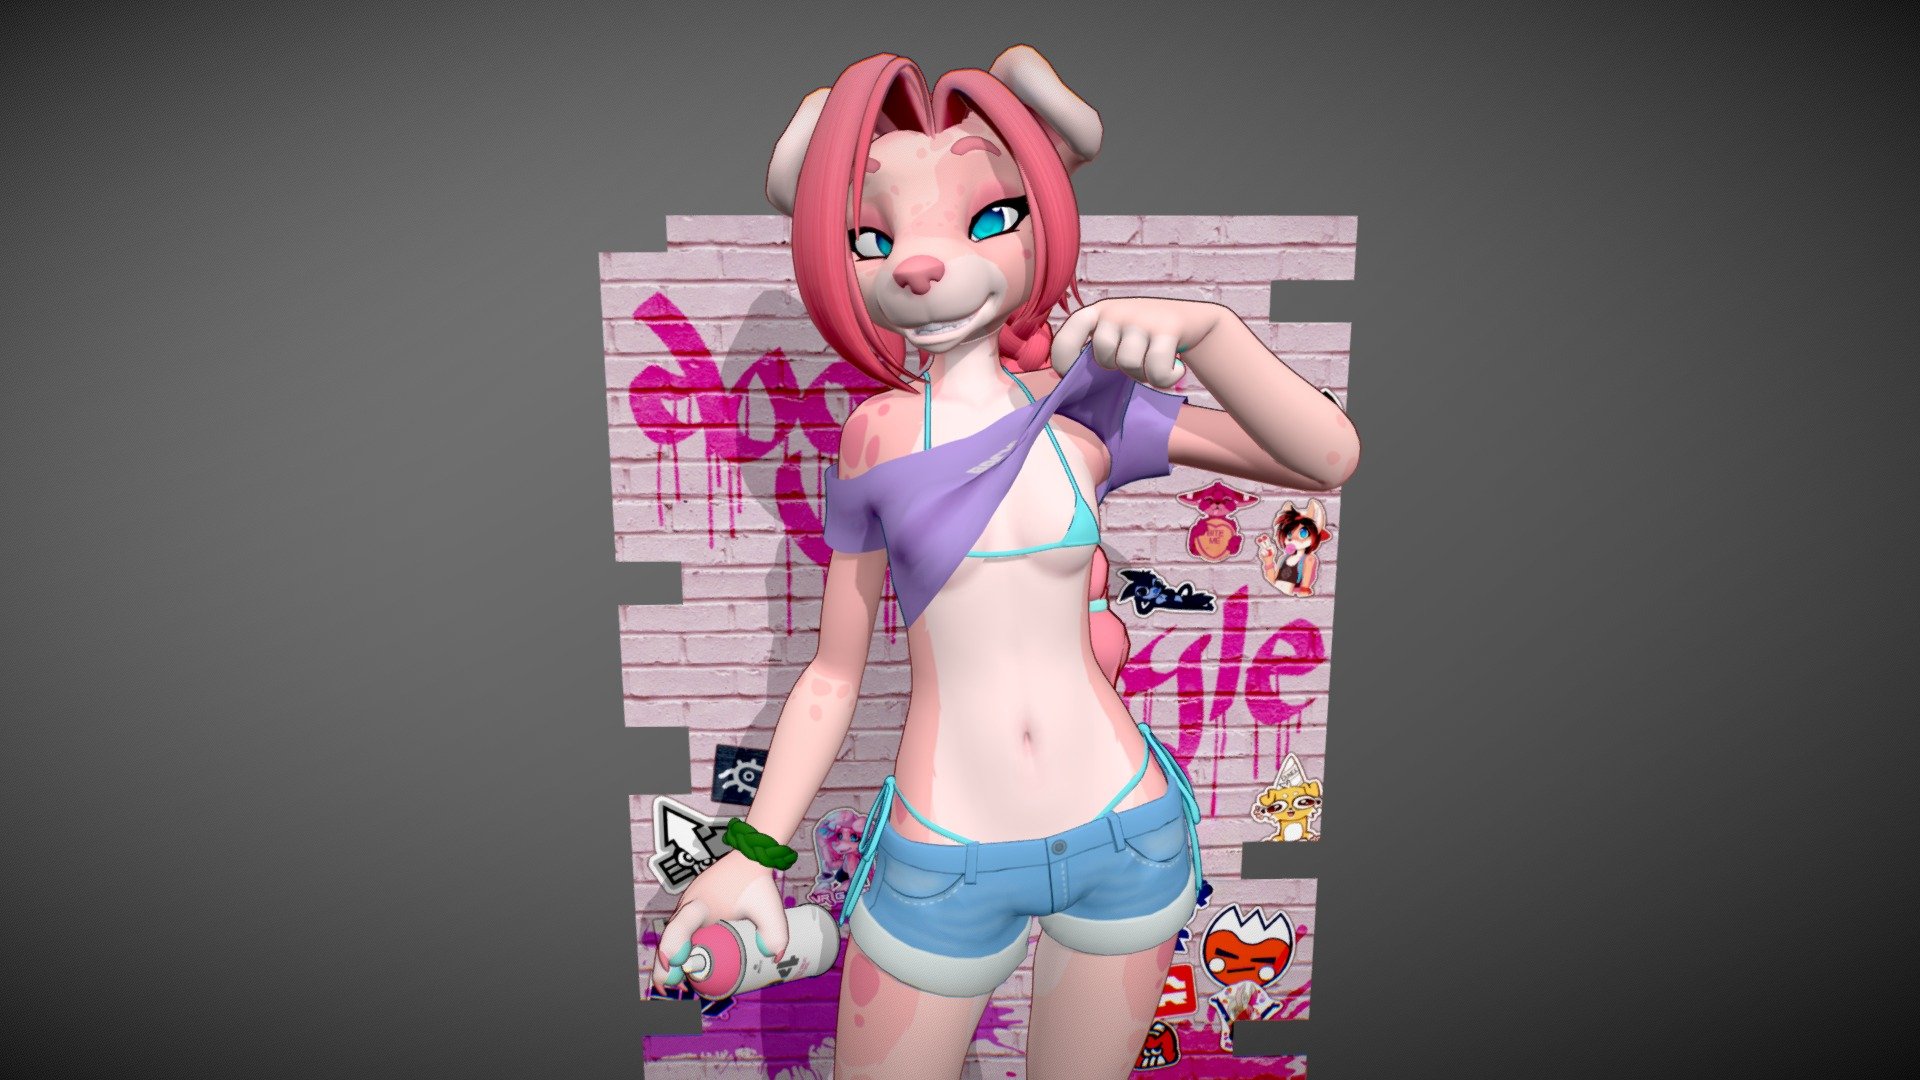 one of my Main OC's featuring in my Comic High Scores https://rb.gy/f2p2v

this particular pose and outfit was designed for a 3D printed figure coming SOON - Chloe (OC) - 3D model by kayla fox (@kaylafox) 3d model